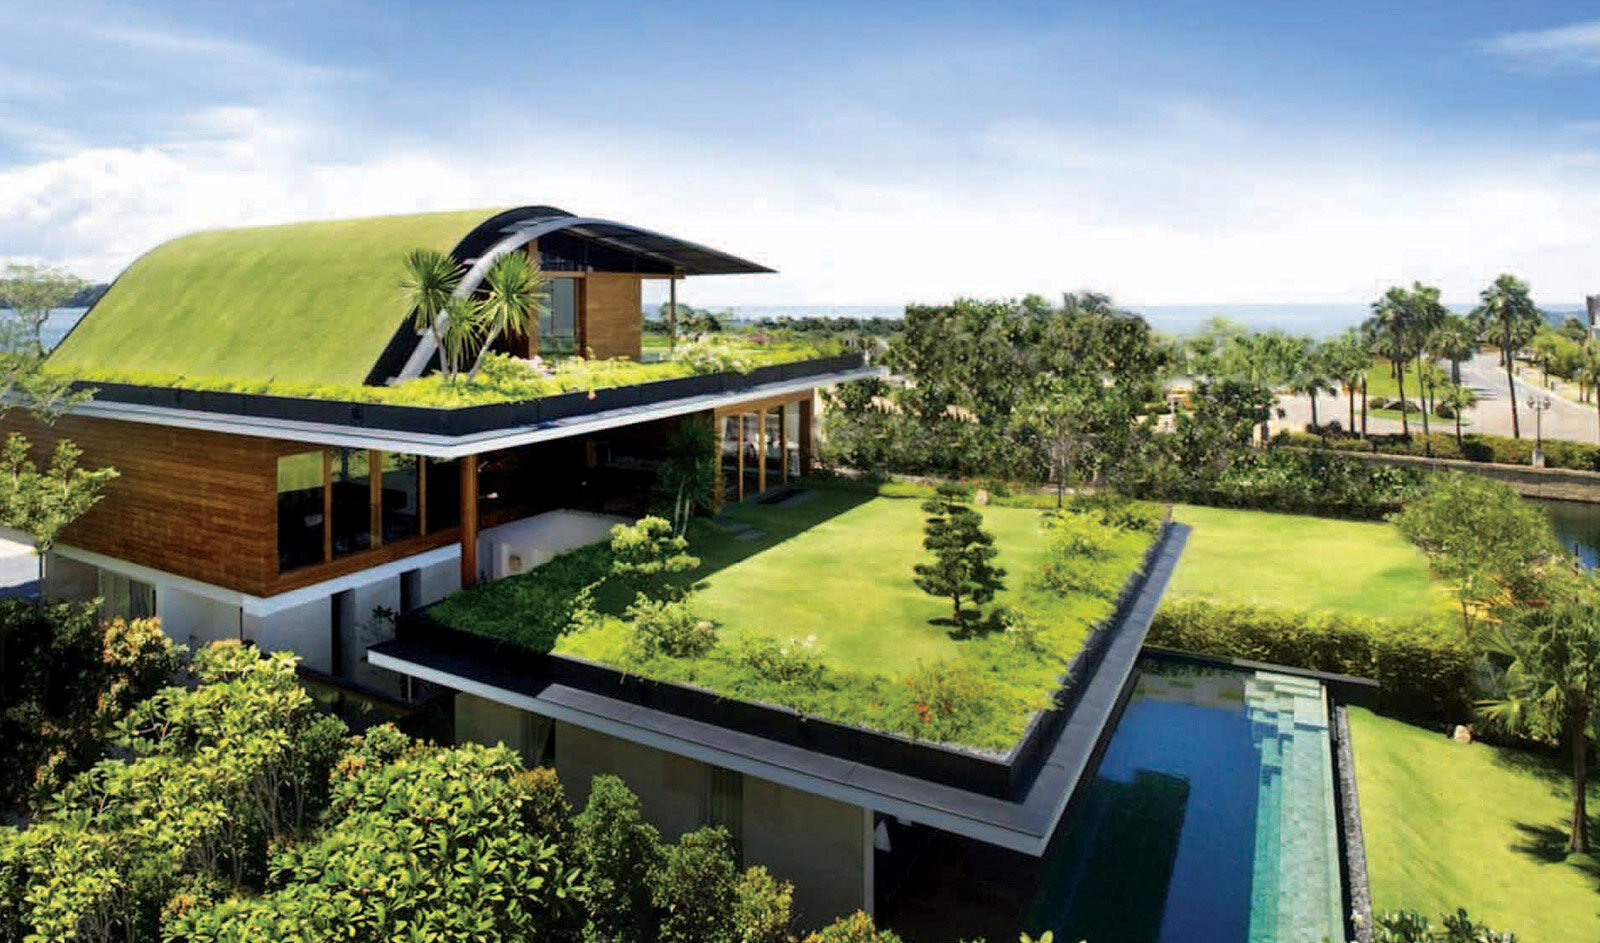 A Green Roof Has a Variety of Advantages